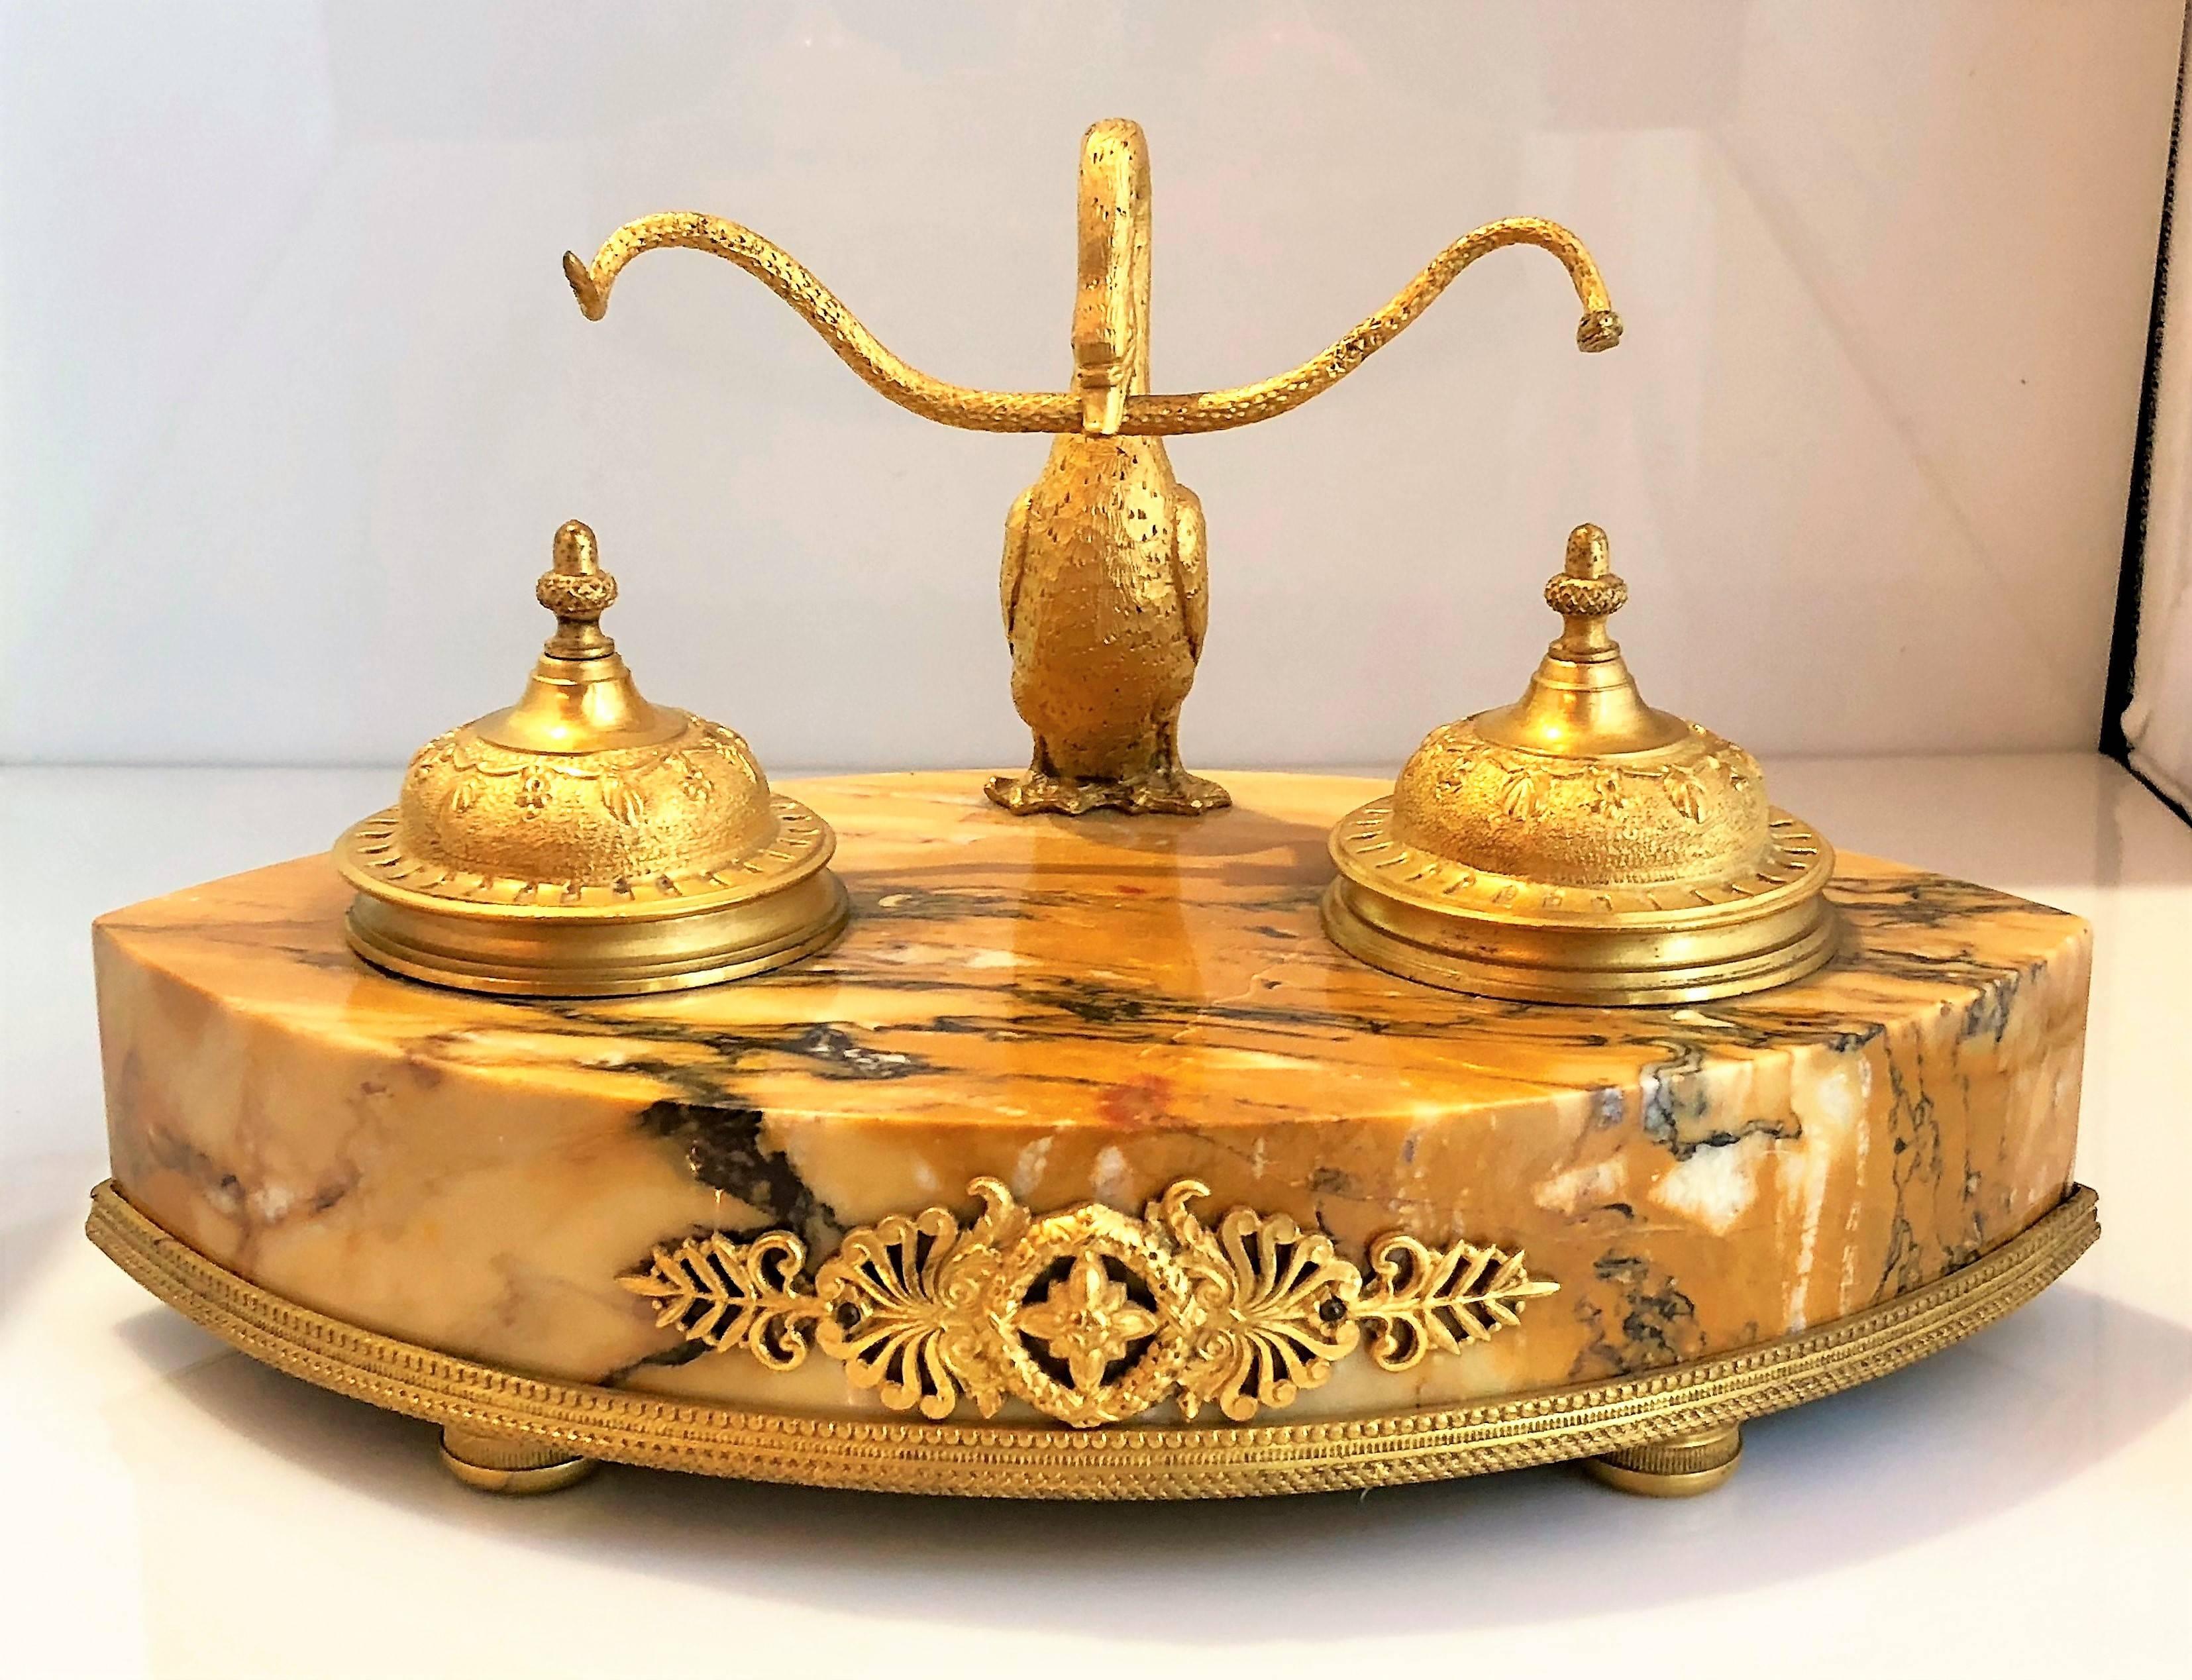 Antique French Empire marble and bronze D'Ore Inkwell, circa 1870.